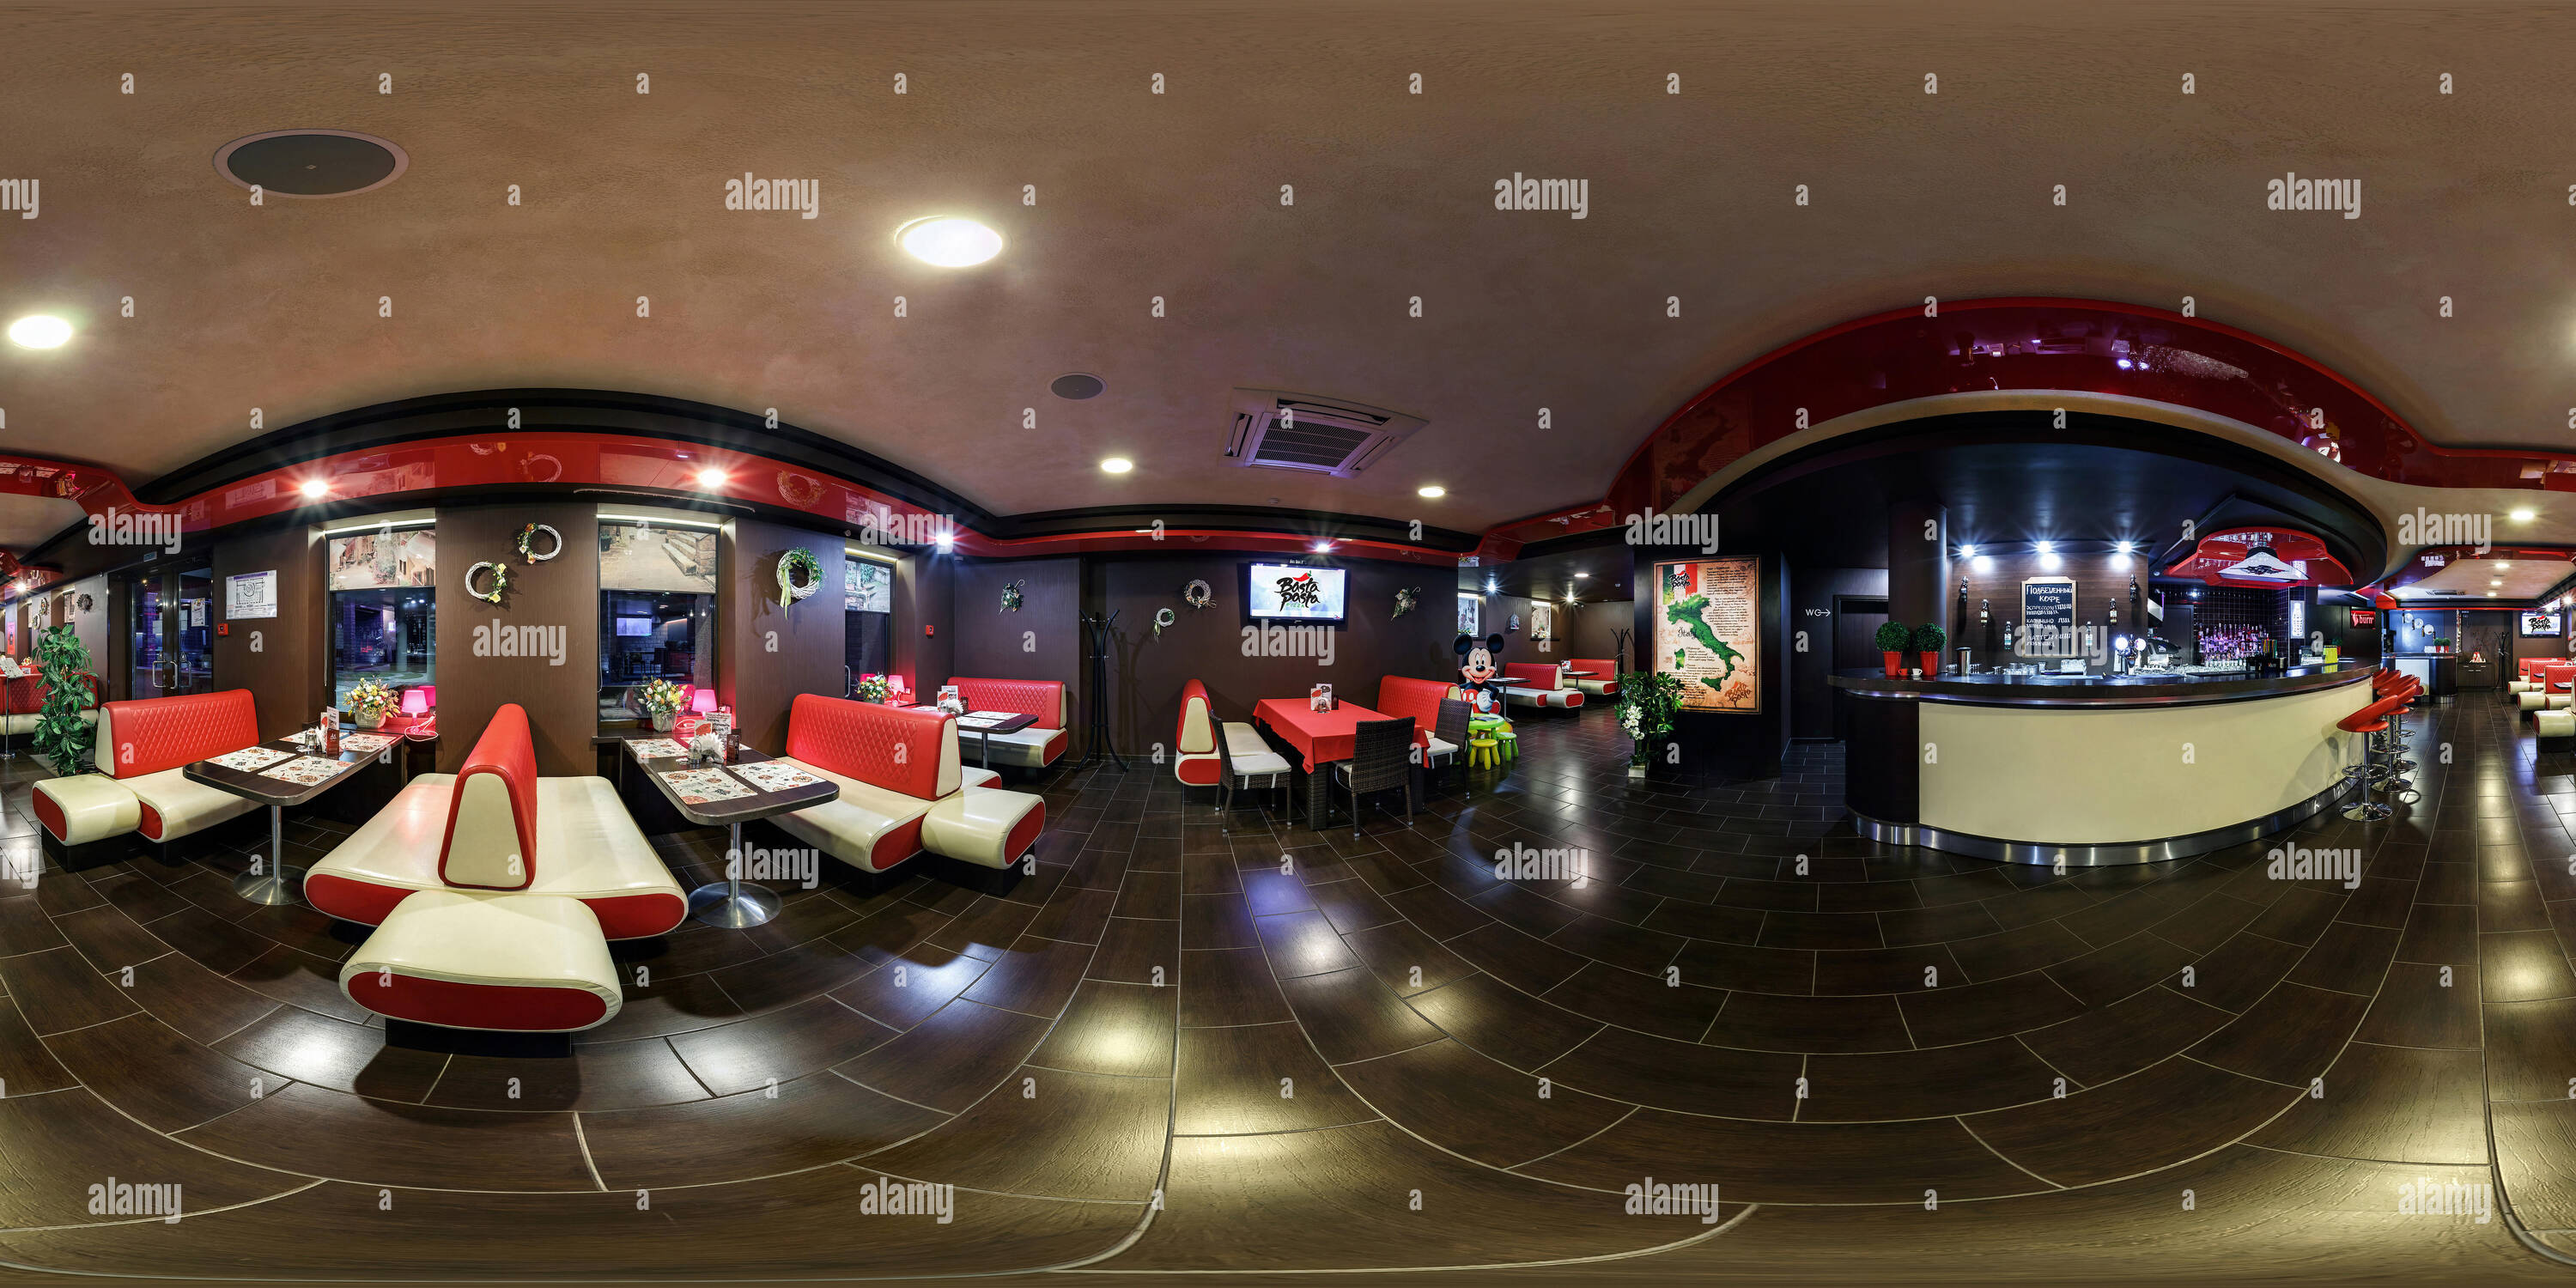 360 degree panoramic view of GRODNO, BELARUS - MARCH 8, 2015: Full 360 by 180 degree seamless panorama in equirectangular spherical projection in interior stylish italian cafe piz